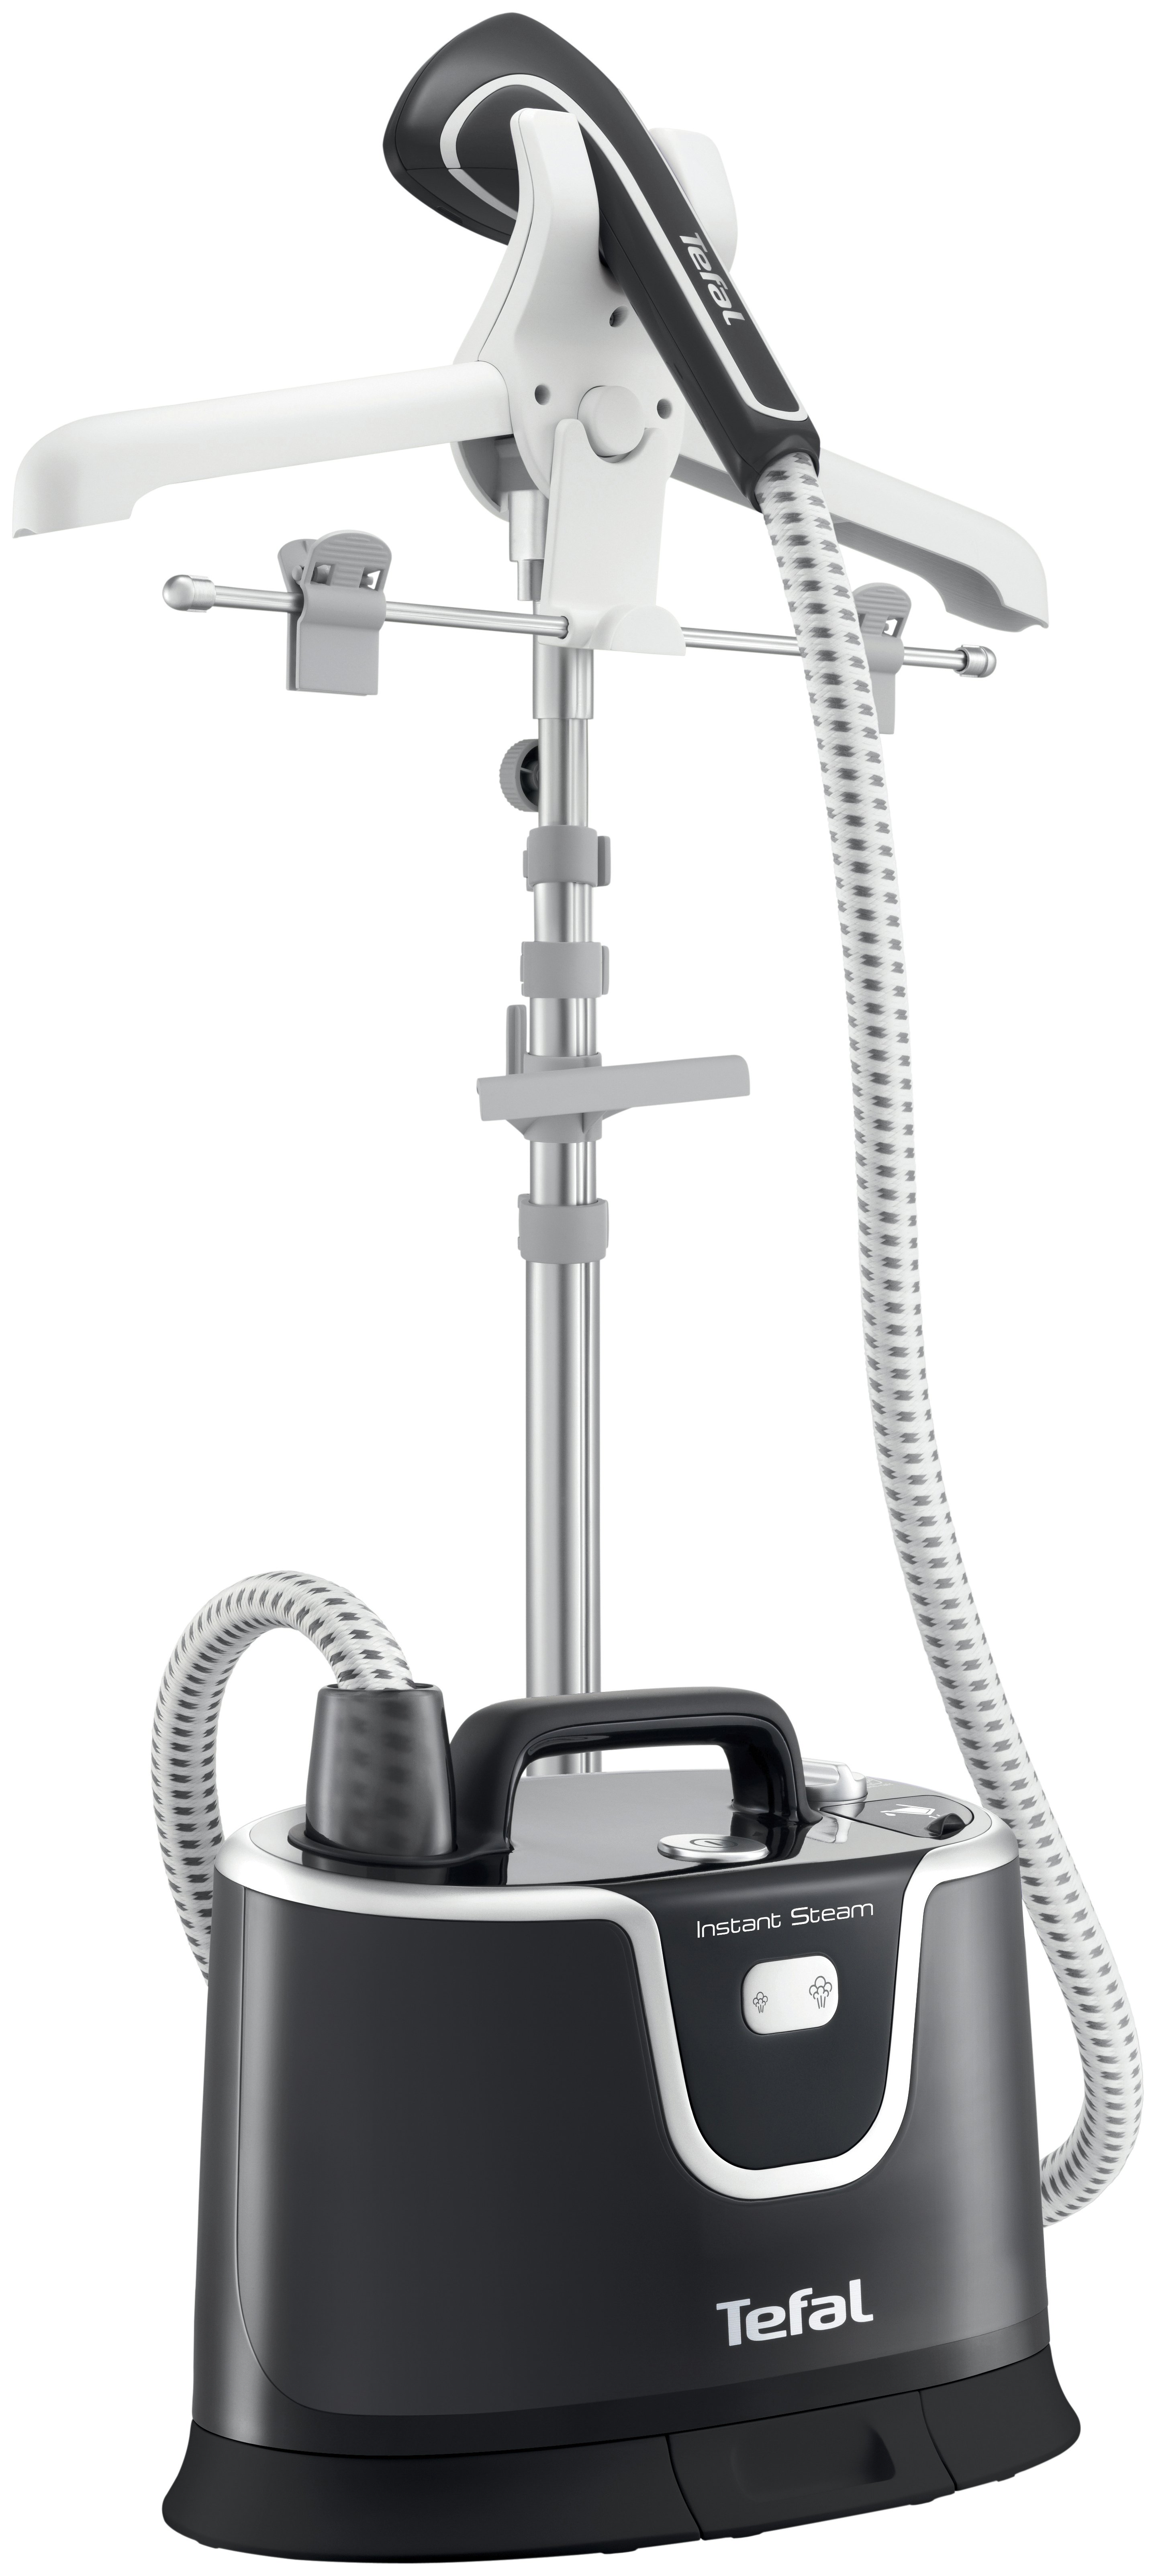 Tefal Instant Compact IS3361 Upright Clothes Garment Steamer Reviews